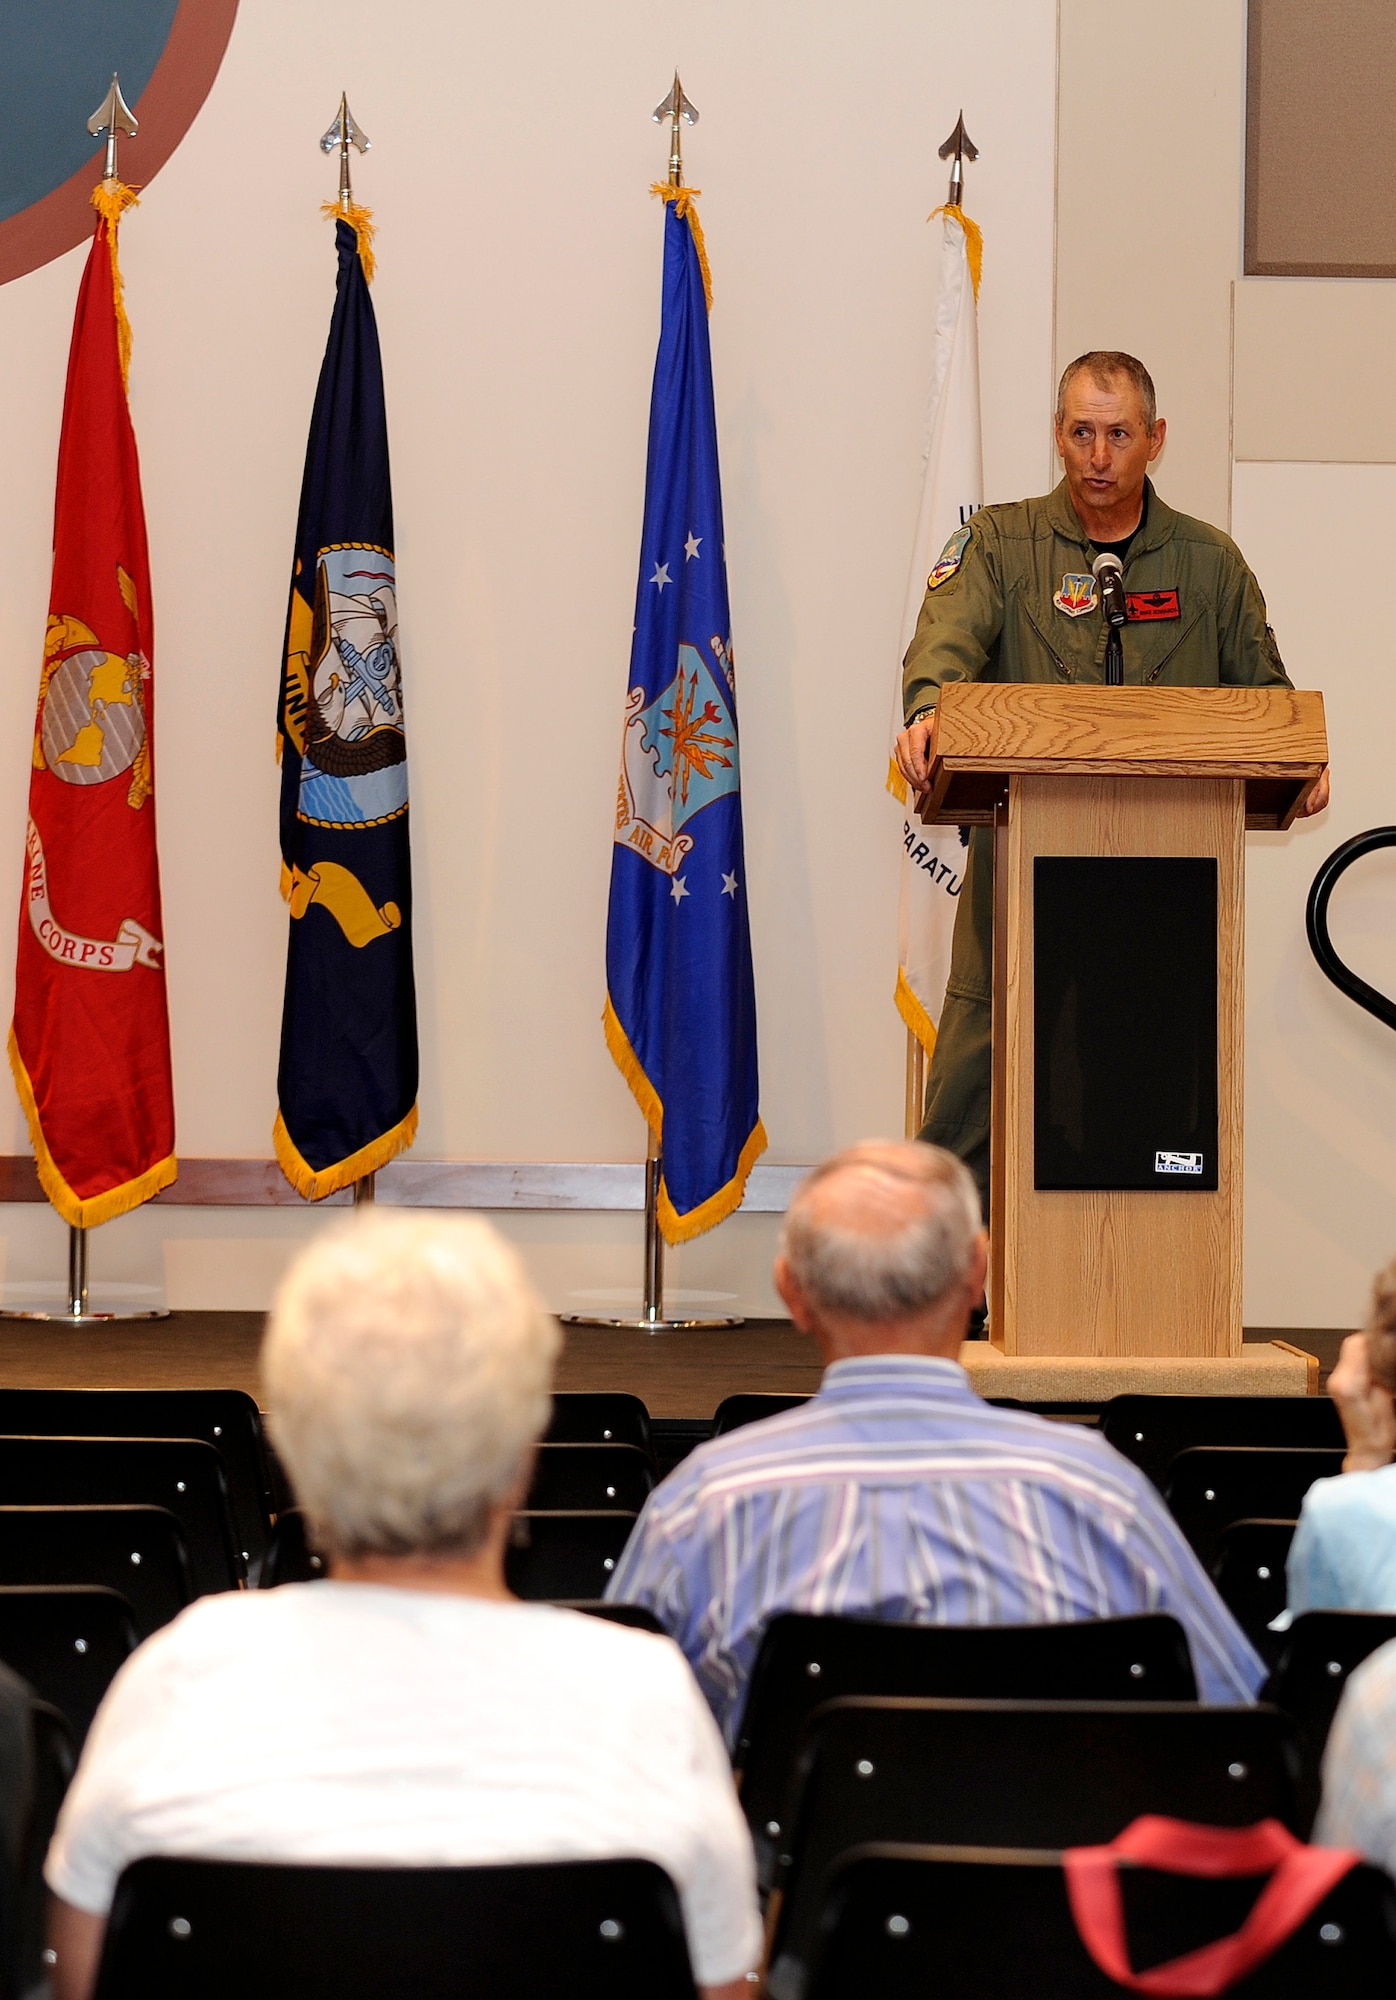 BUCKLEY AIR FORCE BASE, Colo. - Maj. Gen. H. Michael Edwards, Colorado's Adjutant General, was the guest speaker at Team Buckley's 11th Annual Retiree Appreciation Day July 18. General Edwards is also the governor's Executive Director of Military and Veteran Affairs. (U.S. Air Force photo by Senior Airman Steve Czyz)